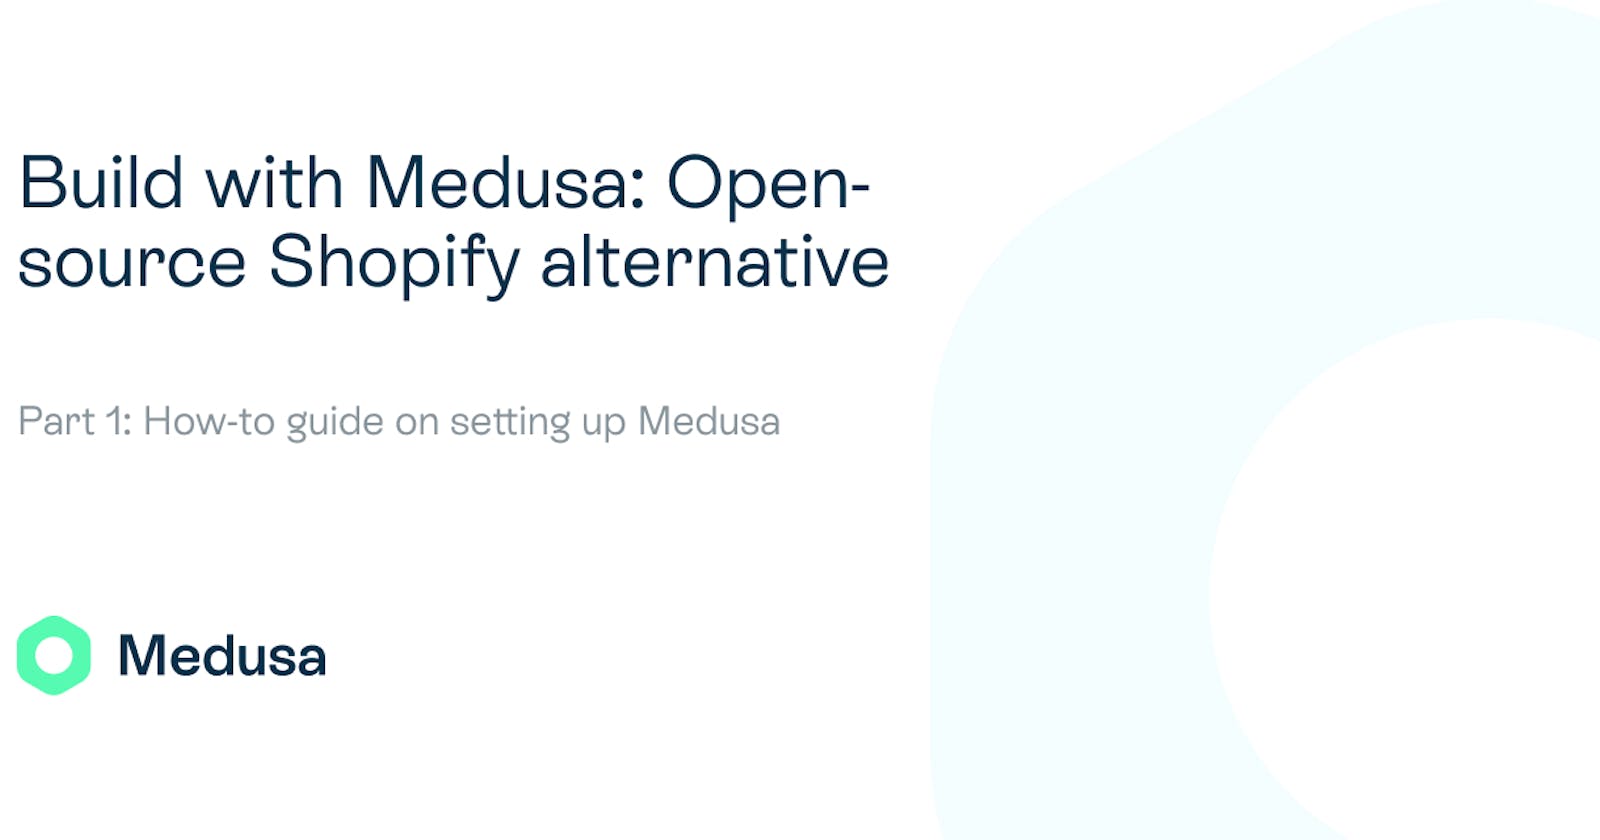 Build with Medusa (1/3): Open-source Shopify alternative